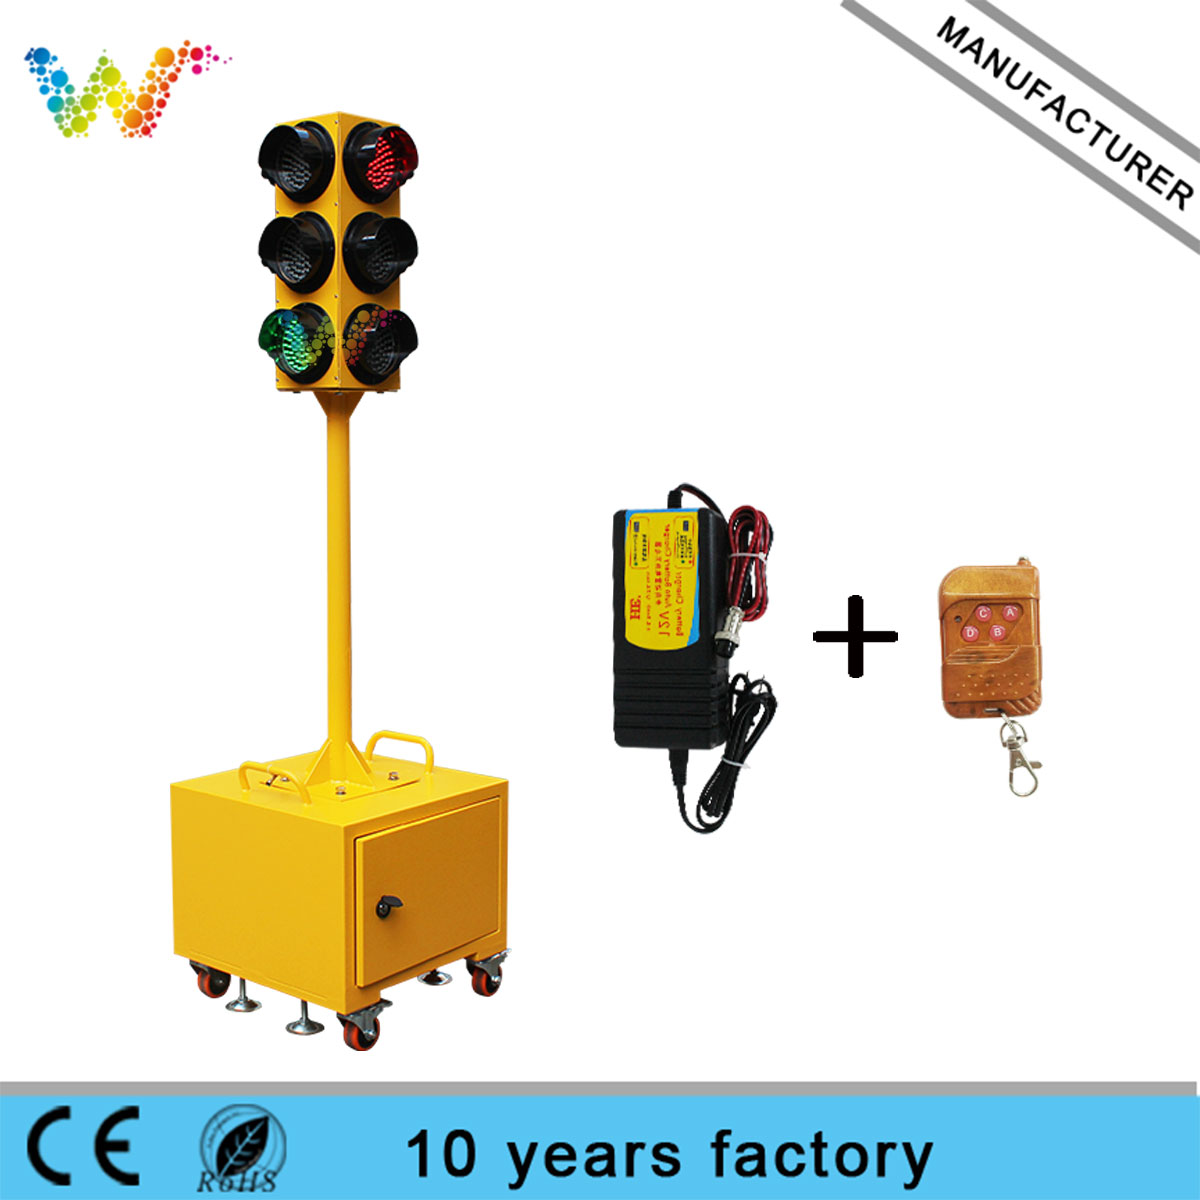 red amber green 125mm mobile traffic signal light